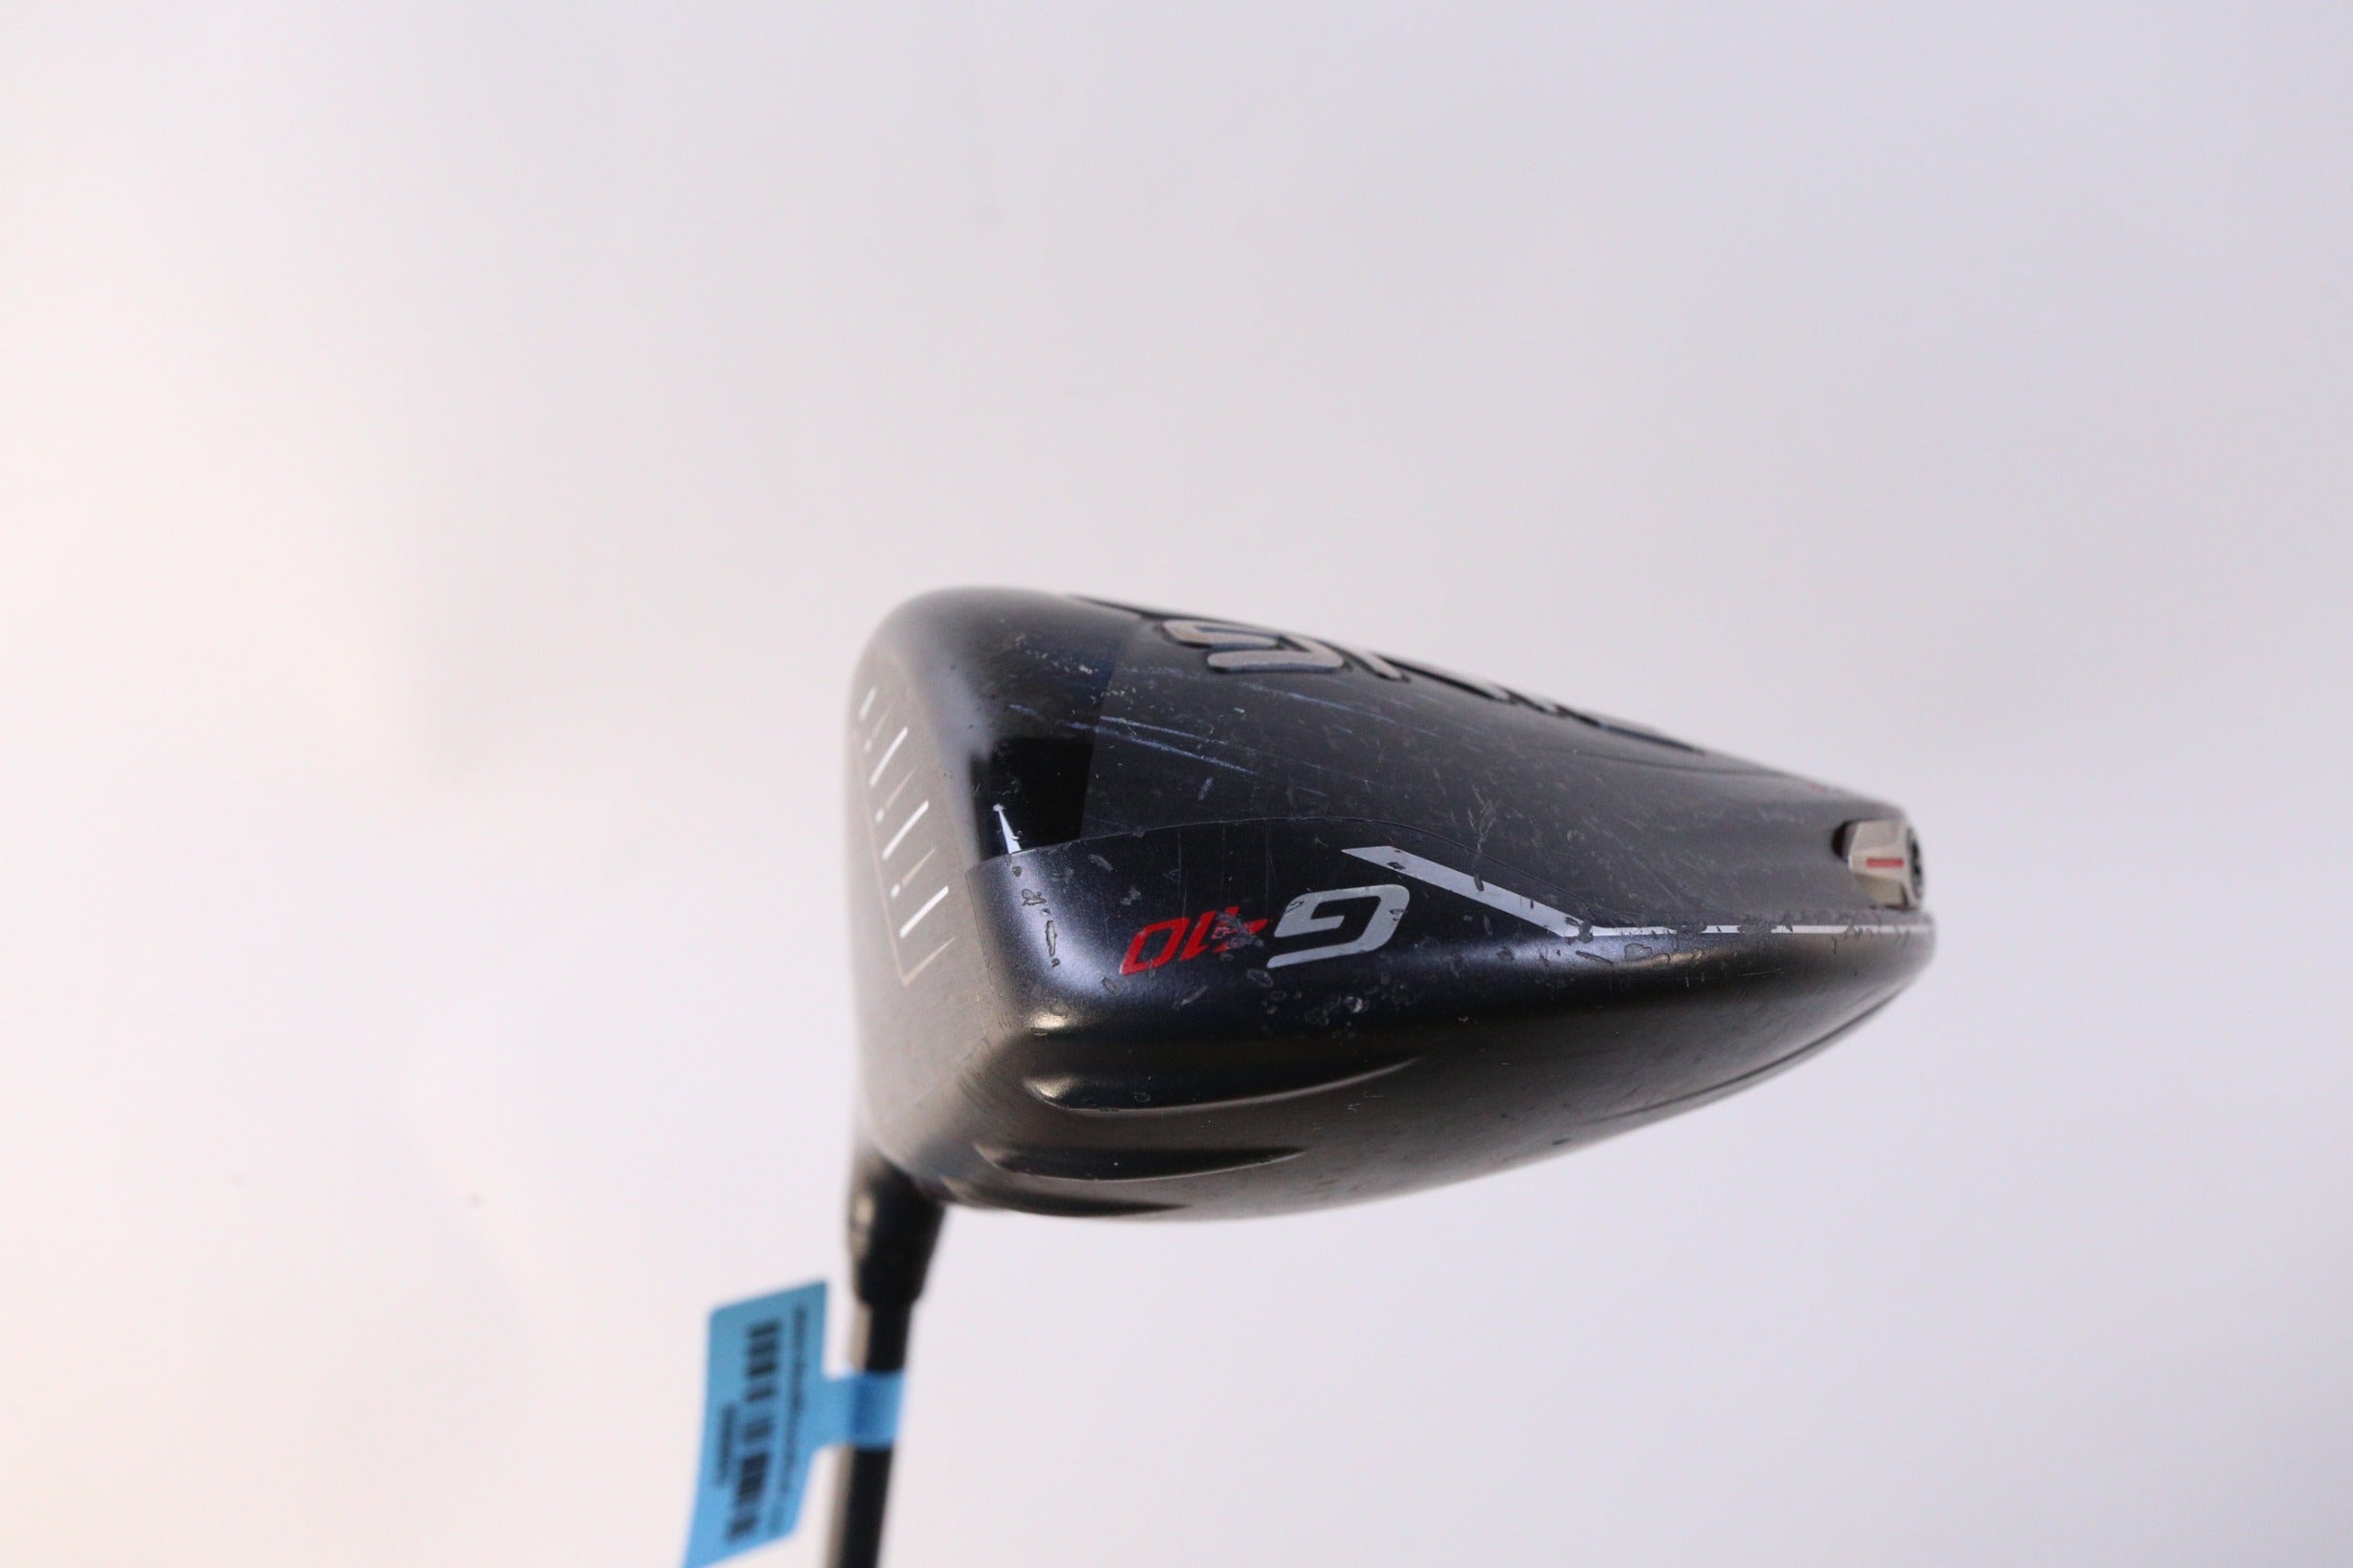 Used Ping G410 LST Driver - Right-Handed - 10.5 Degrees - Soft Regular Flex